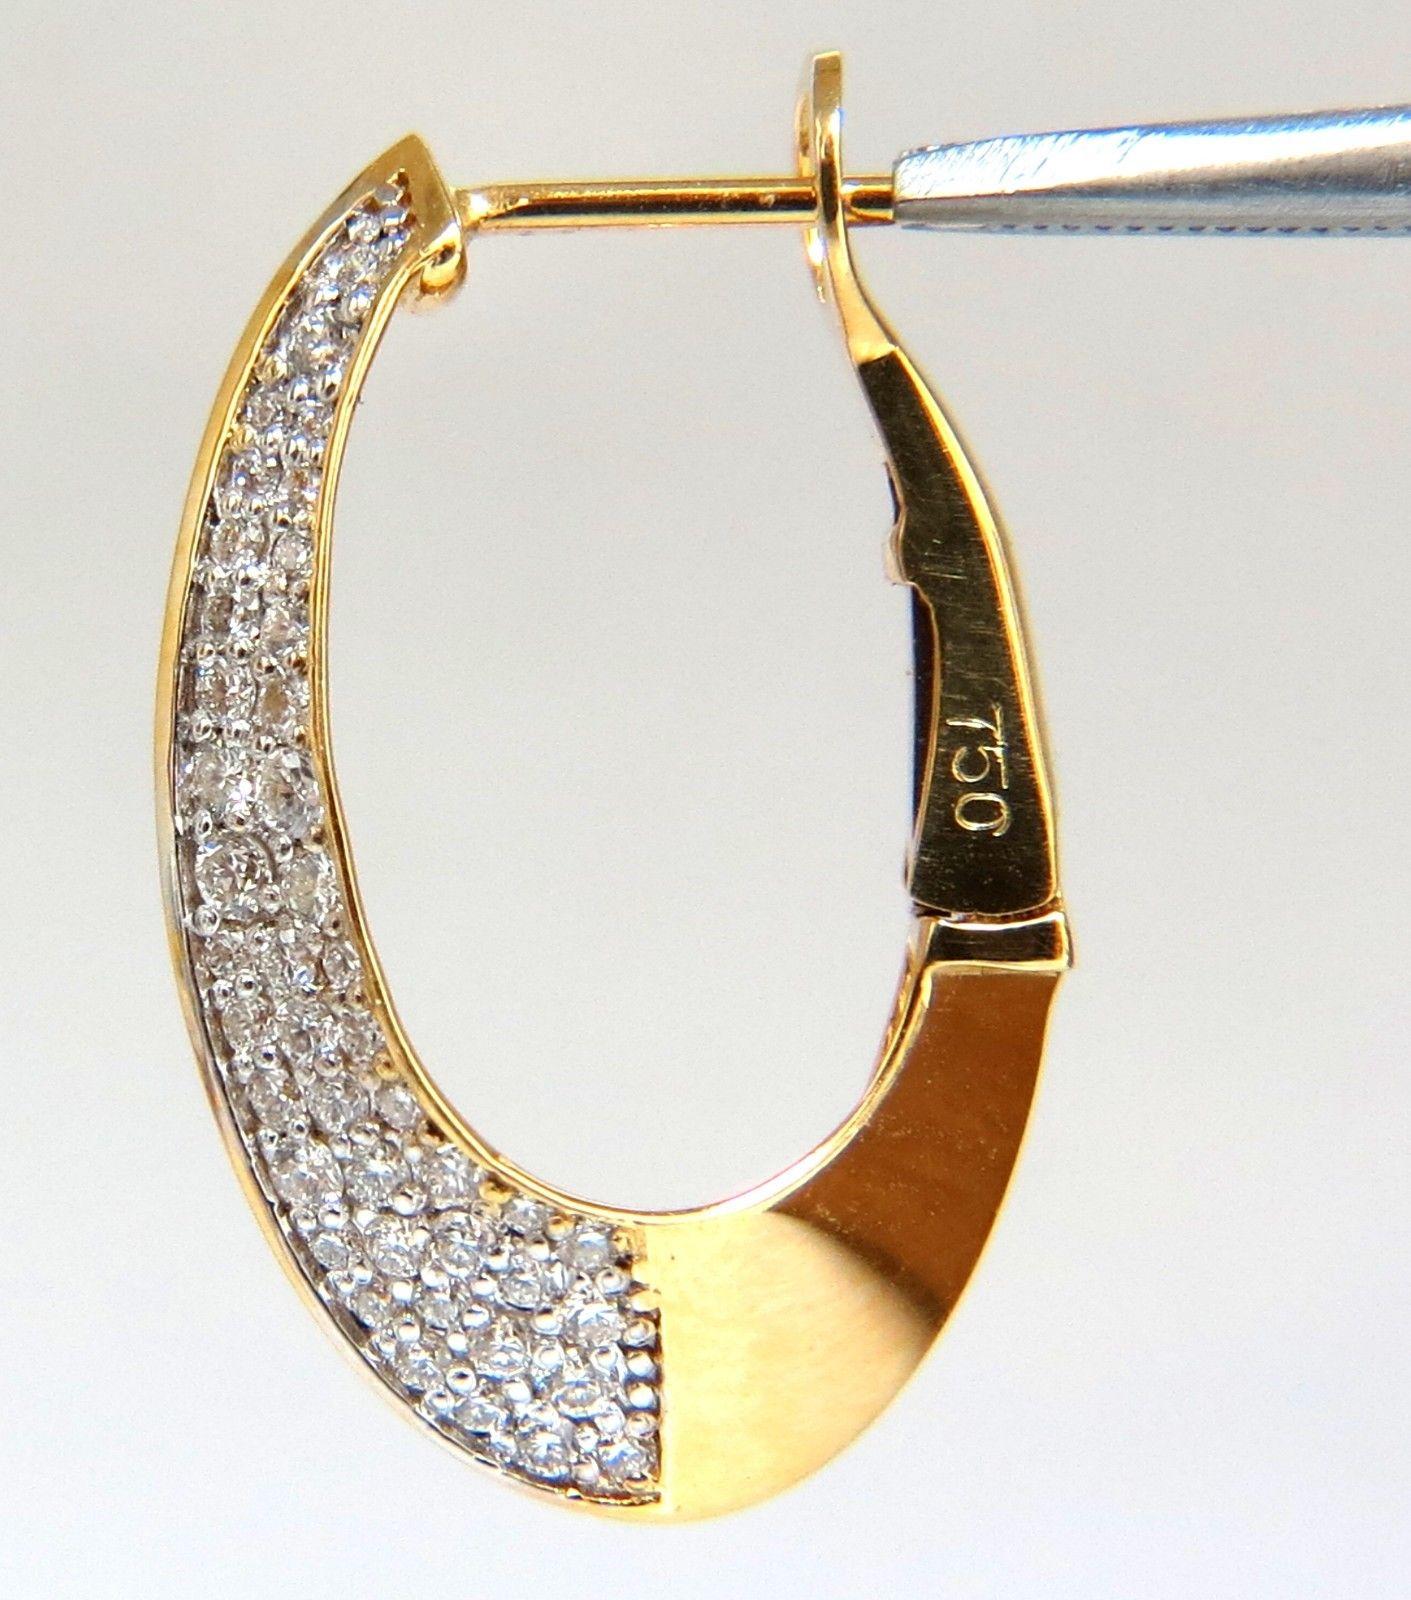 Elongated Hoop, Comfort Lever closure 

1.00ct. Natural diamonds  

Rounds, Full cut brilliants.

G- color Vs-2 Clarity. 

Excellent detail.

18kt. yellow gold

5.7 grams.

.61 inch wide

.96  inch long

$4500 Appraisal Certificate will accompany.